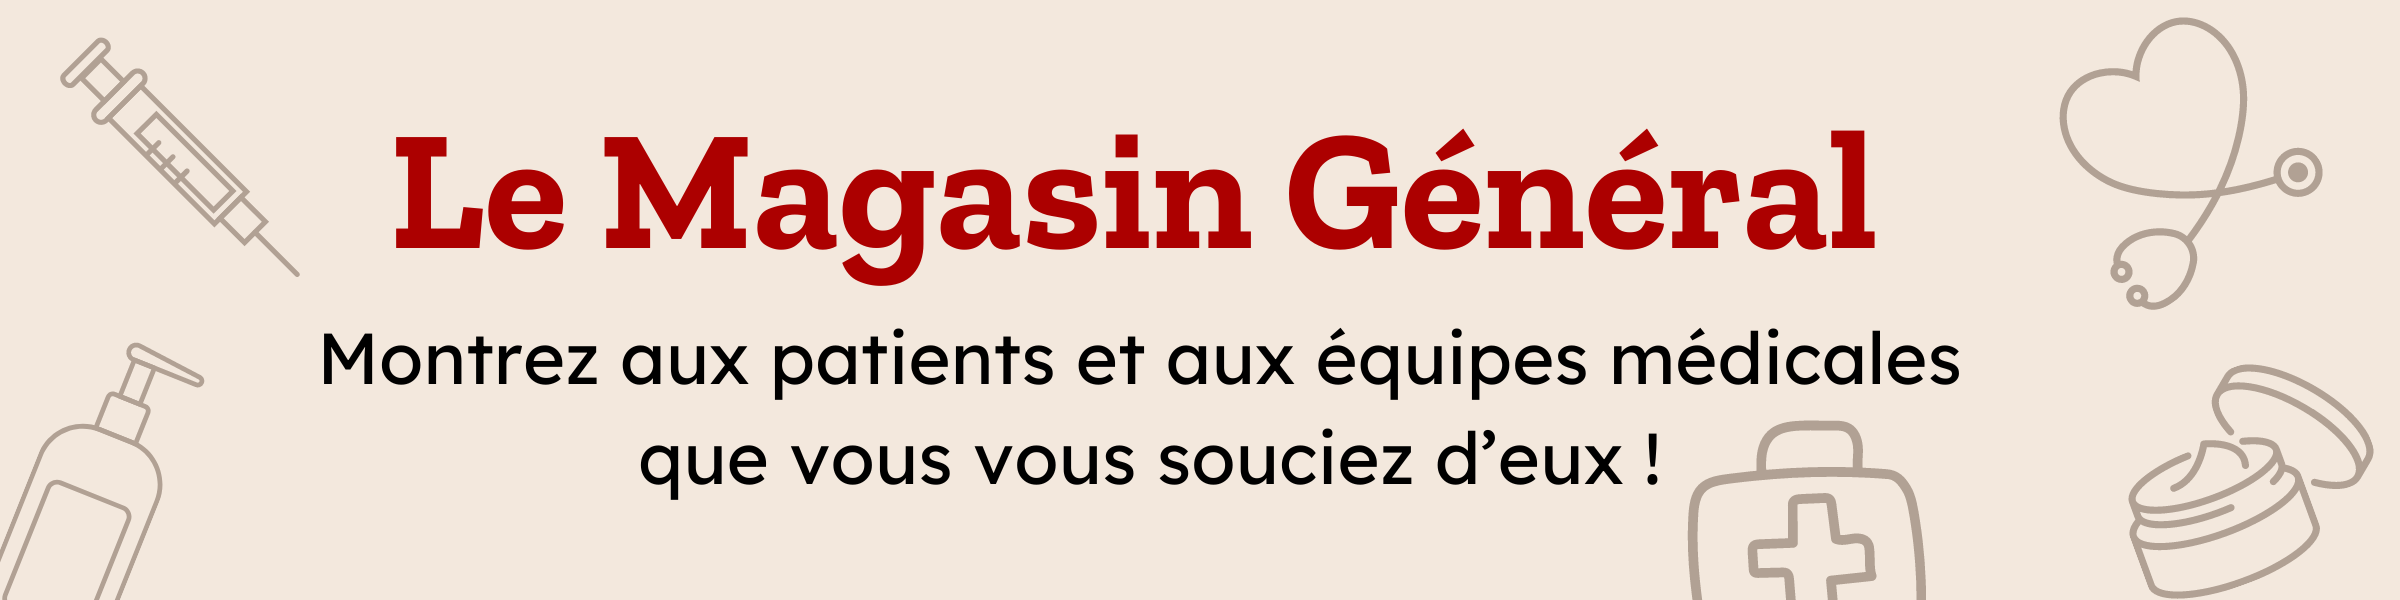 Le Magasin General